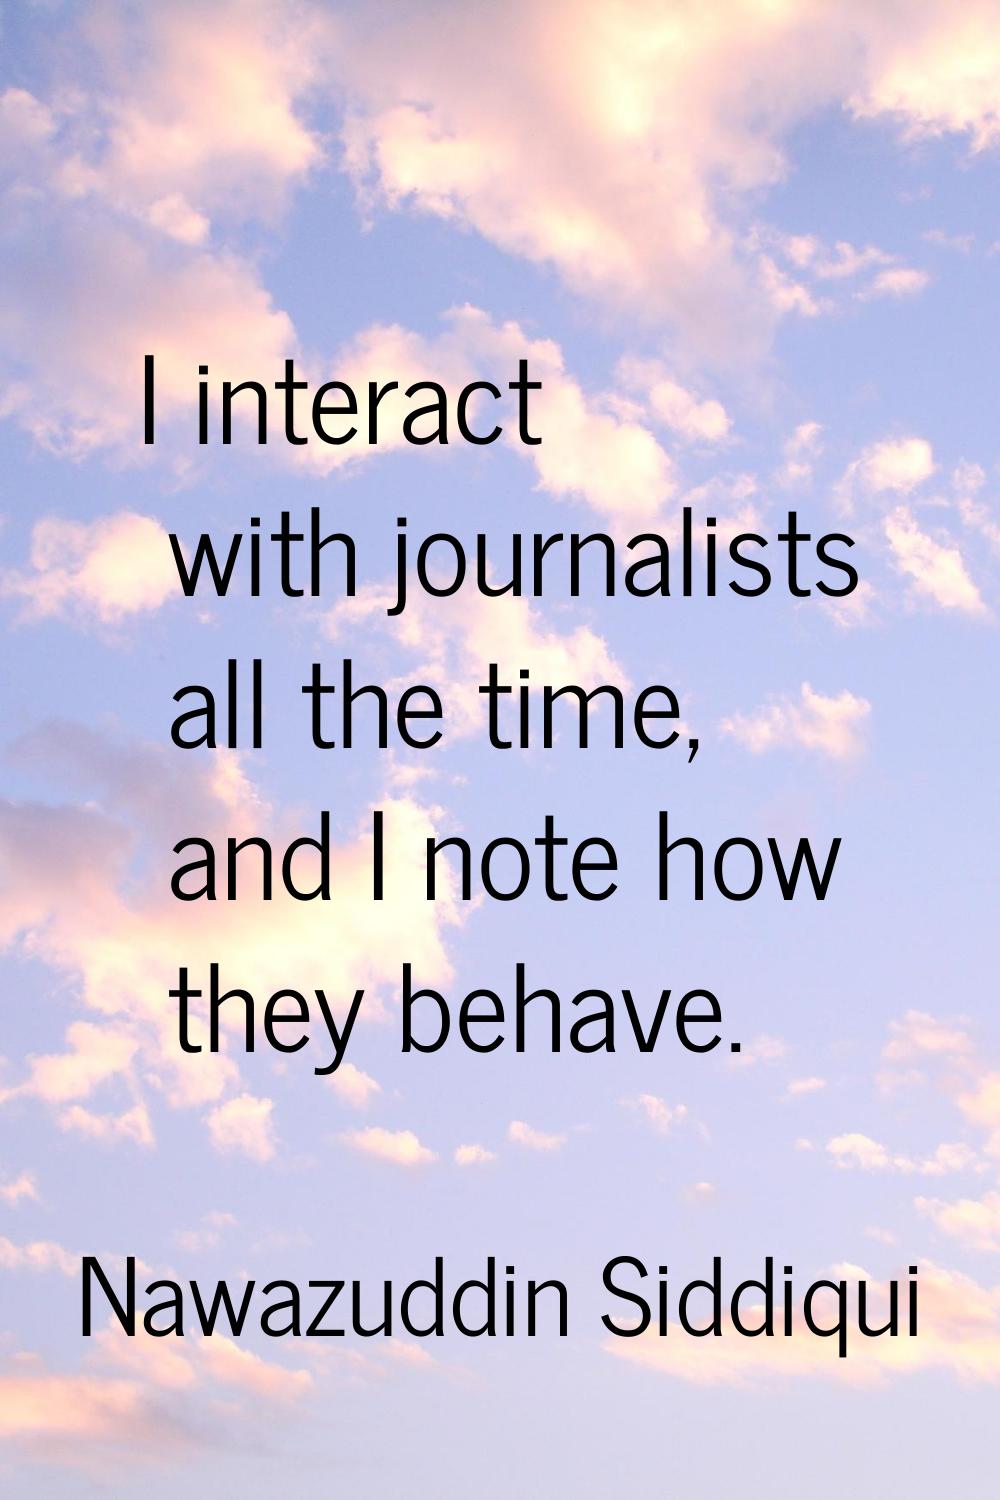 I interact with journalists all the time, and I note how they behave.